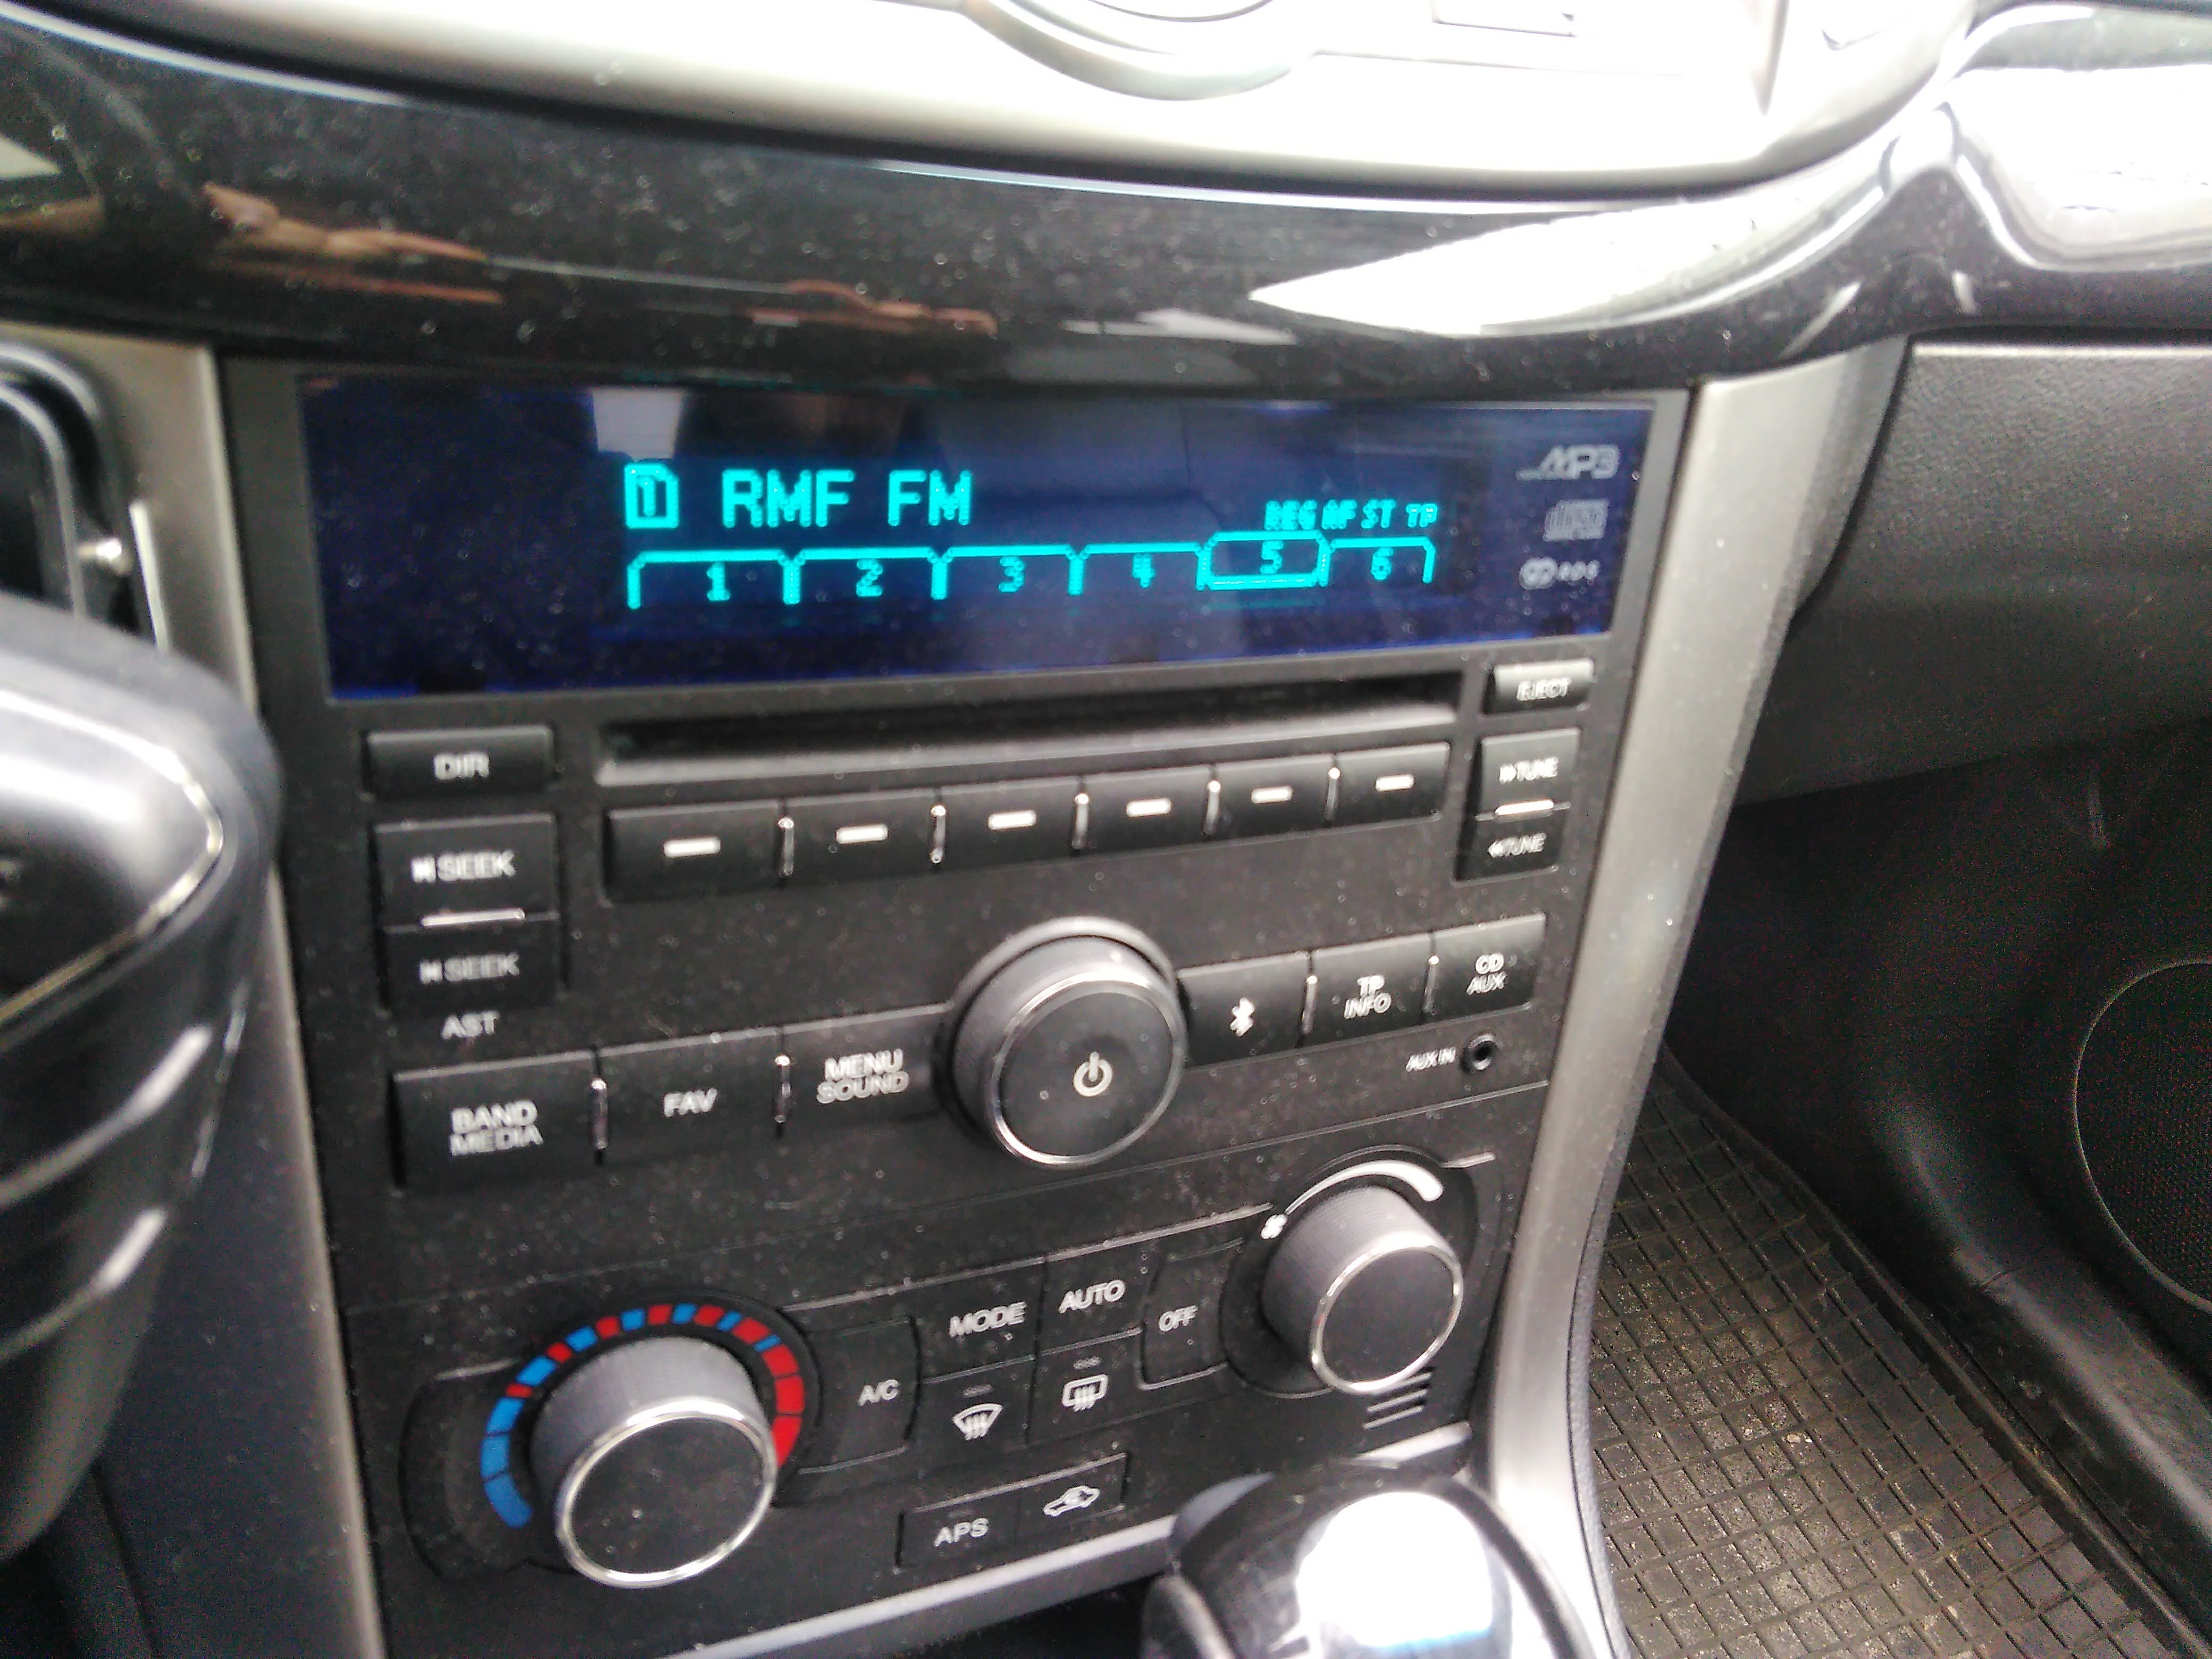 Chevrolet Captiva - Air conditioning display connection diagram